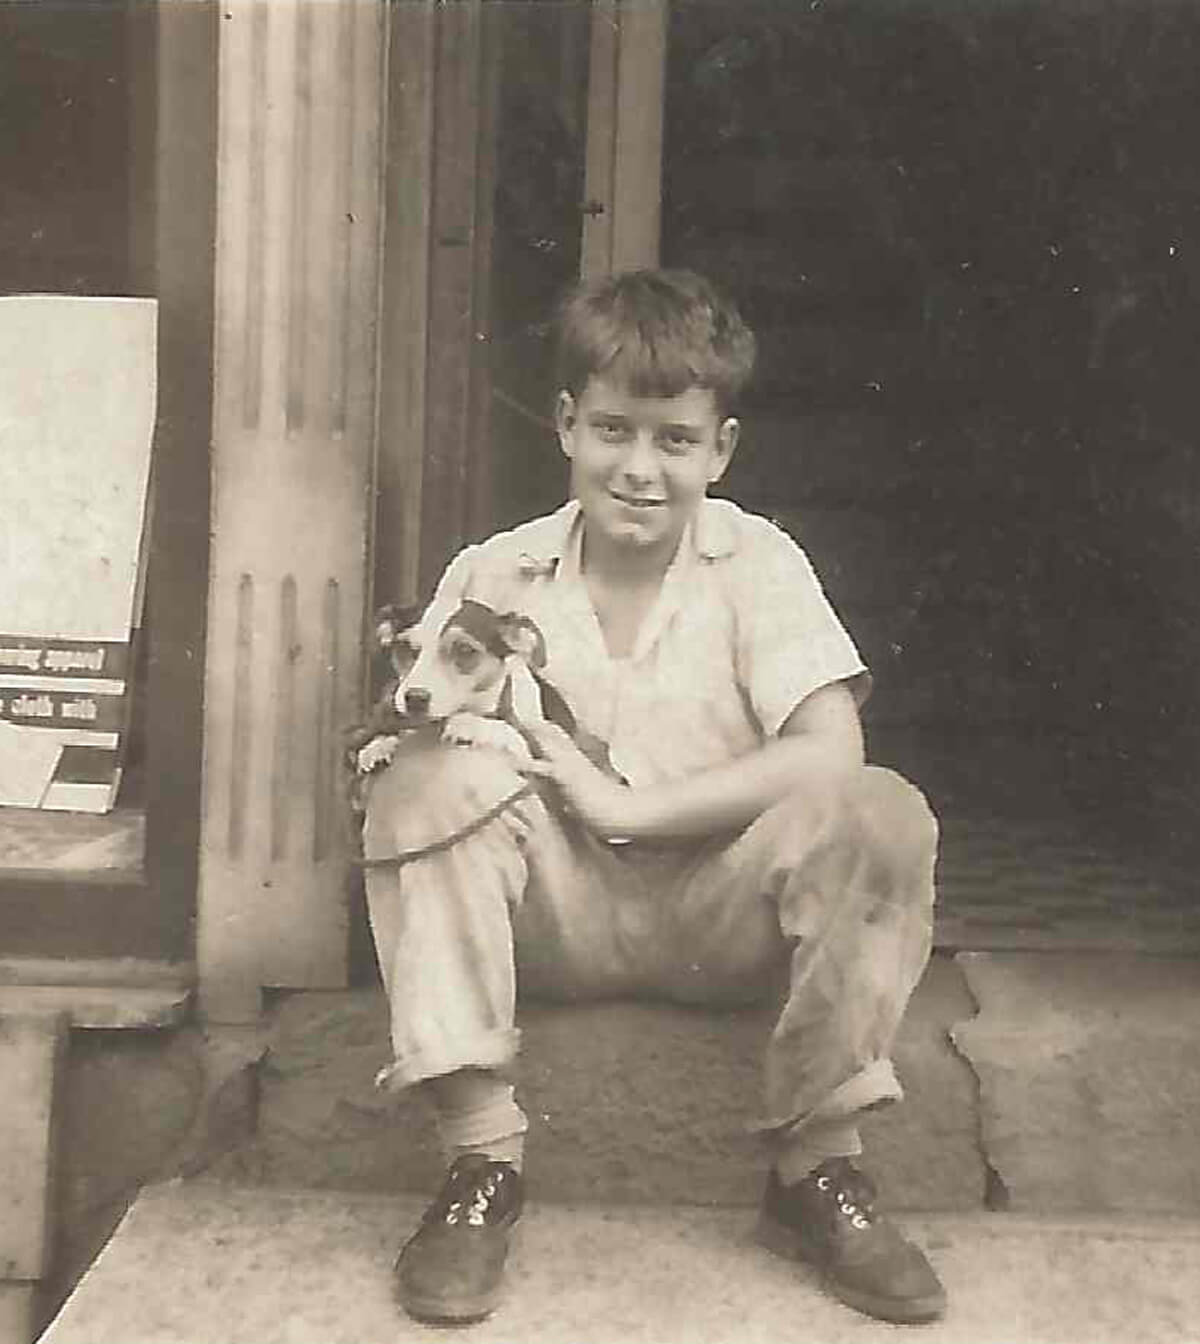 Young Al with dog